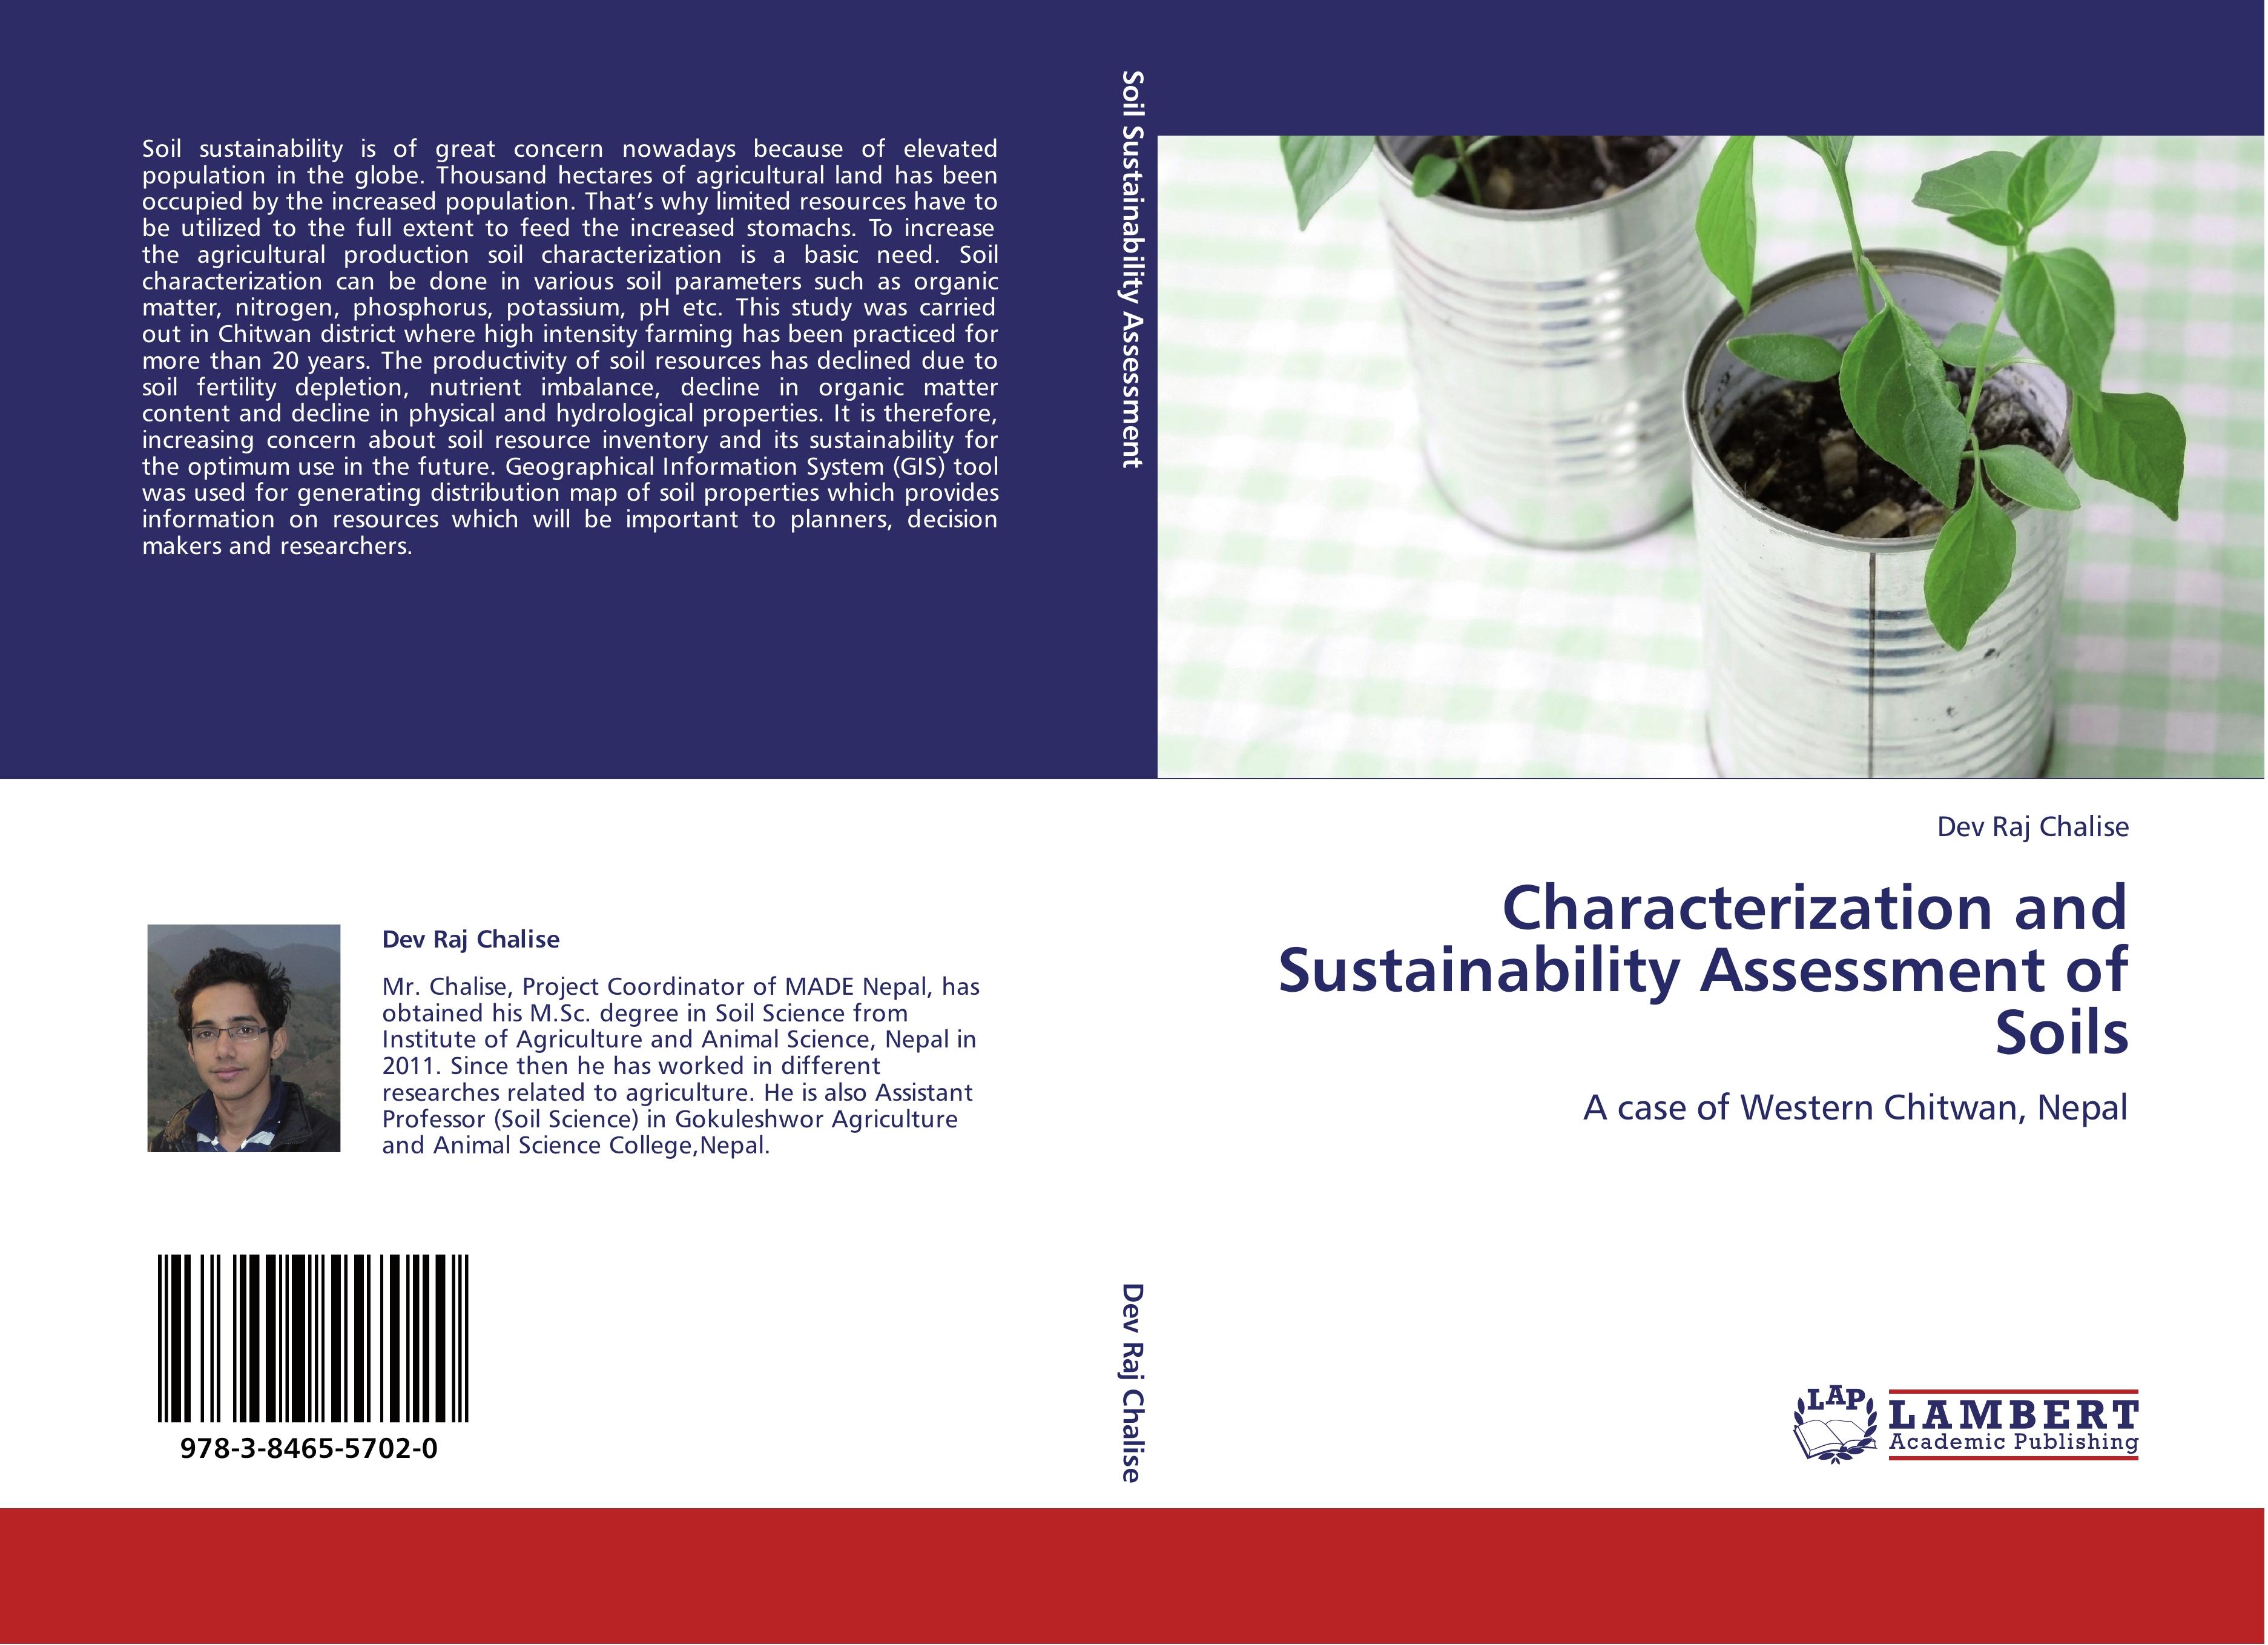 Characterization and Sustainability Assessment of Soils - Dev Raj Chalise